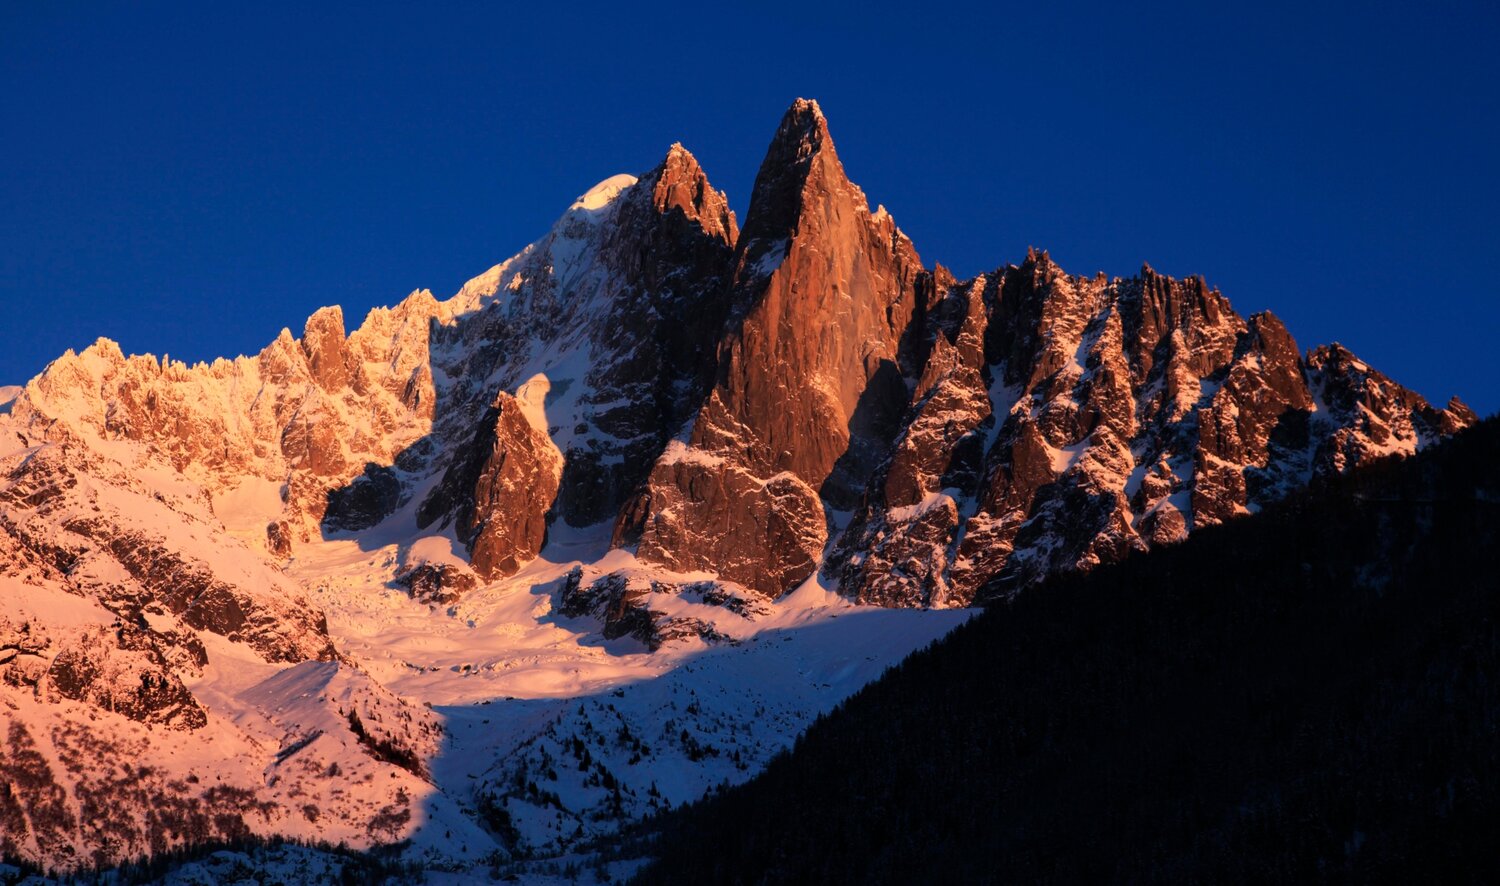 The Aiguille du Dru cast in sharp definition by the last few minutes of midwinter sunlight. In the centre of the Chamonix Valley, and looming over the great icefall climbs of the Argentiere Glacier, the Dru is a constant presence on any climbing trip in the region.